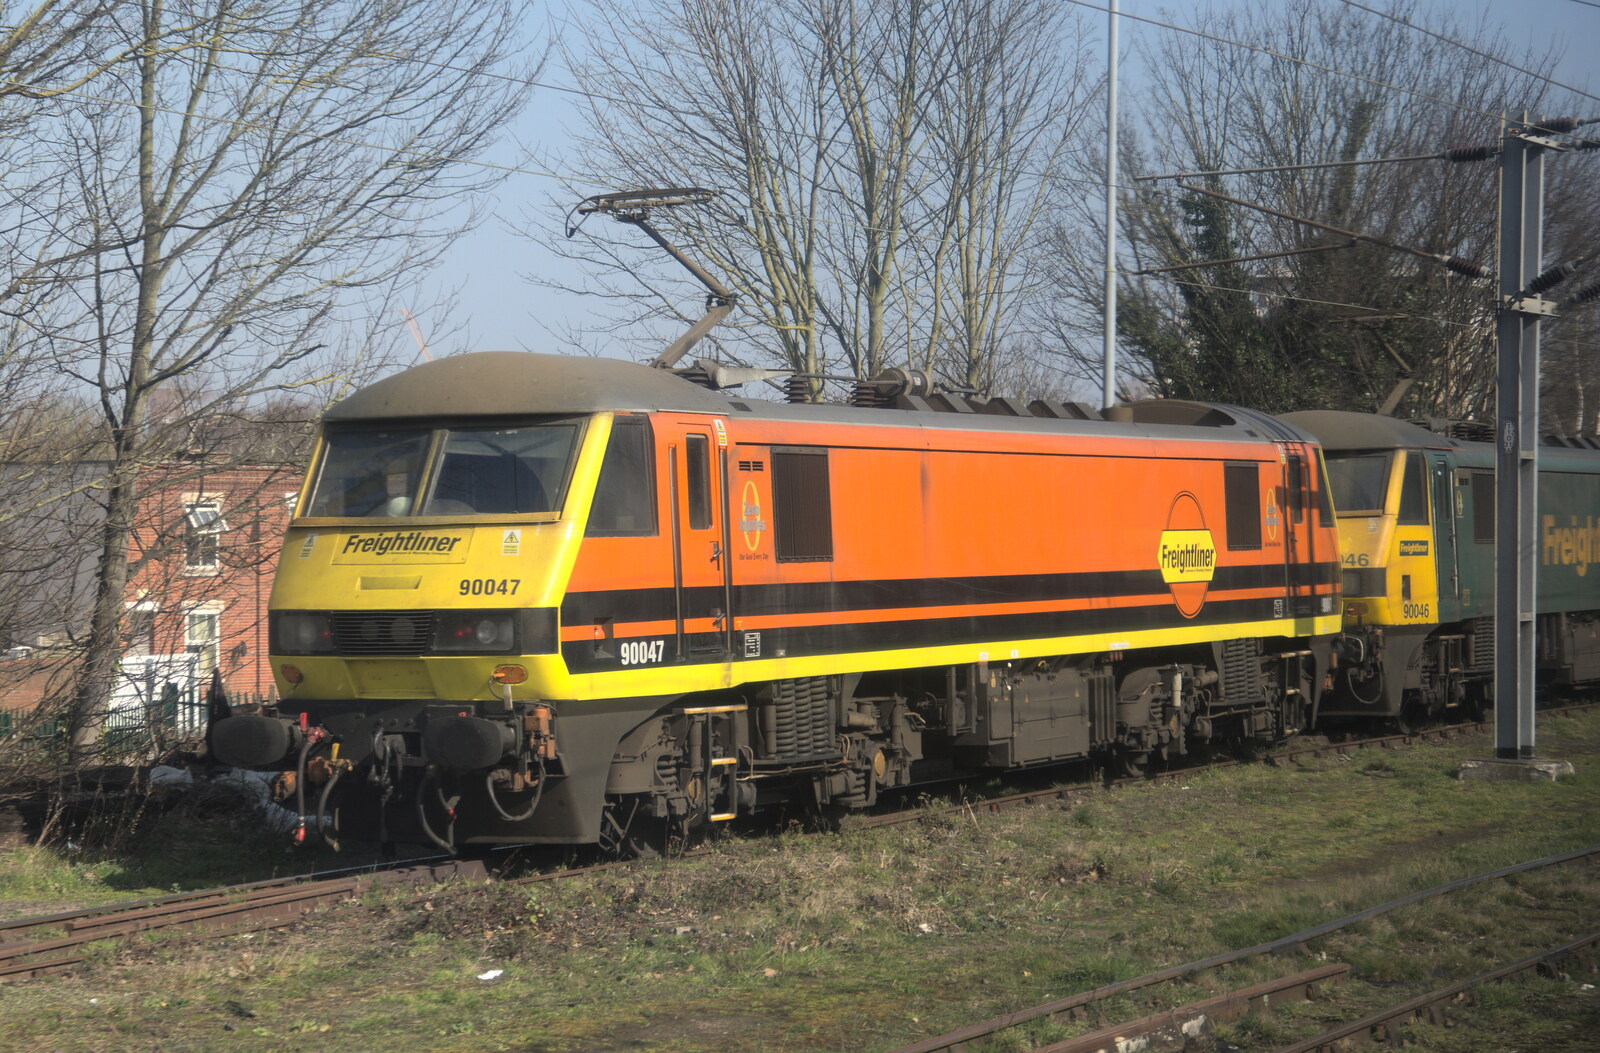 An old Class 90 - 90047 - at Ipswich from Genesis at the O2, North Greenwich, London - 24th March 2022